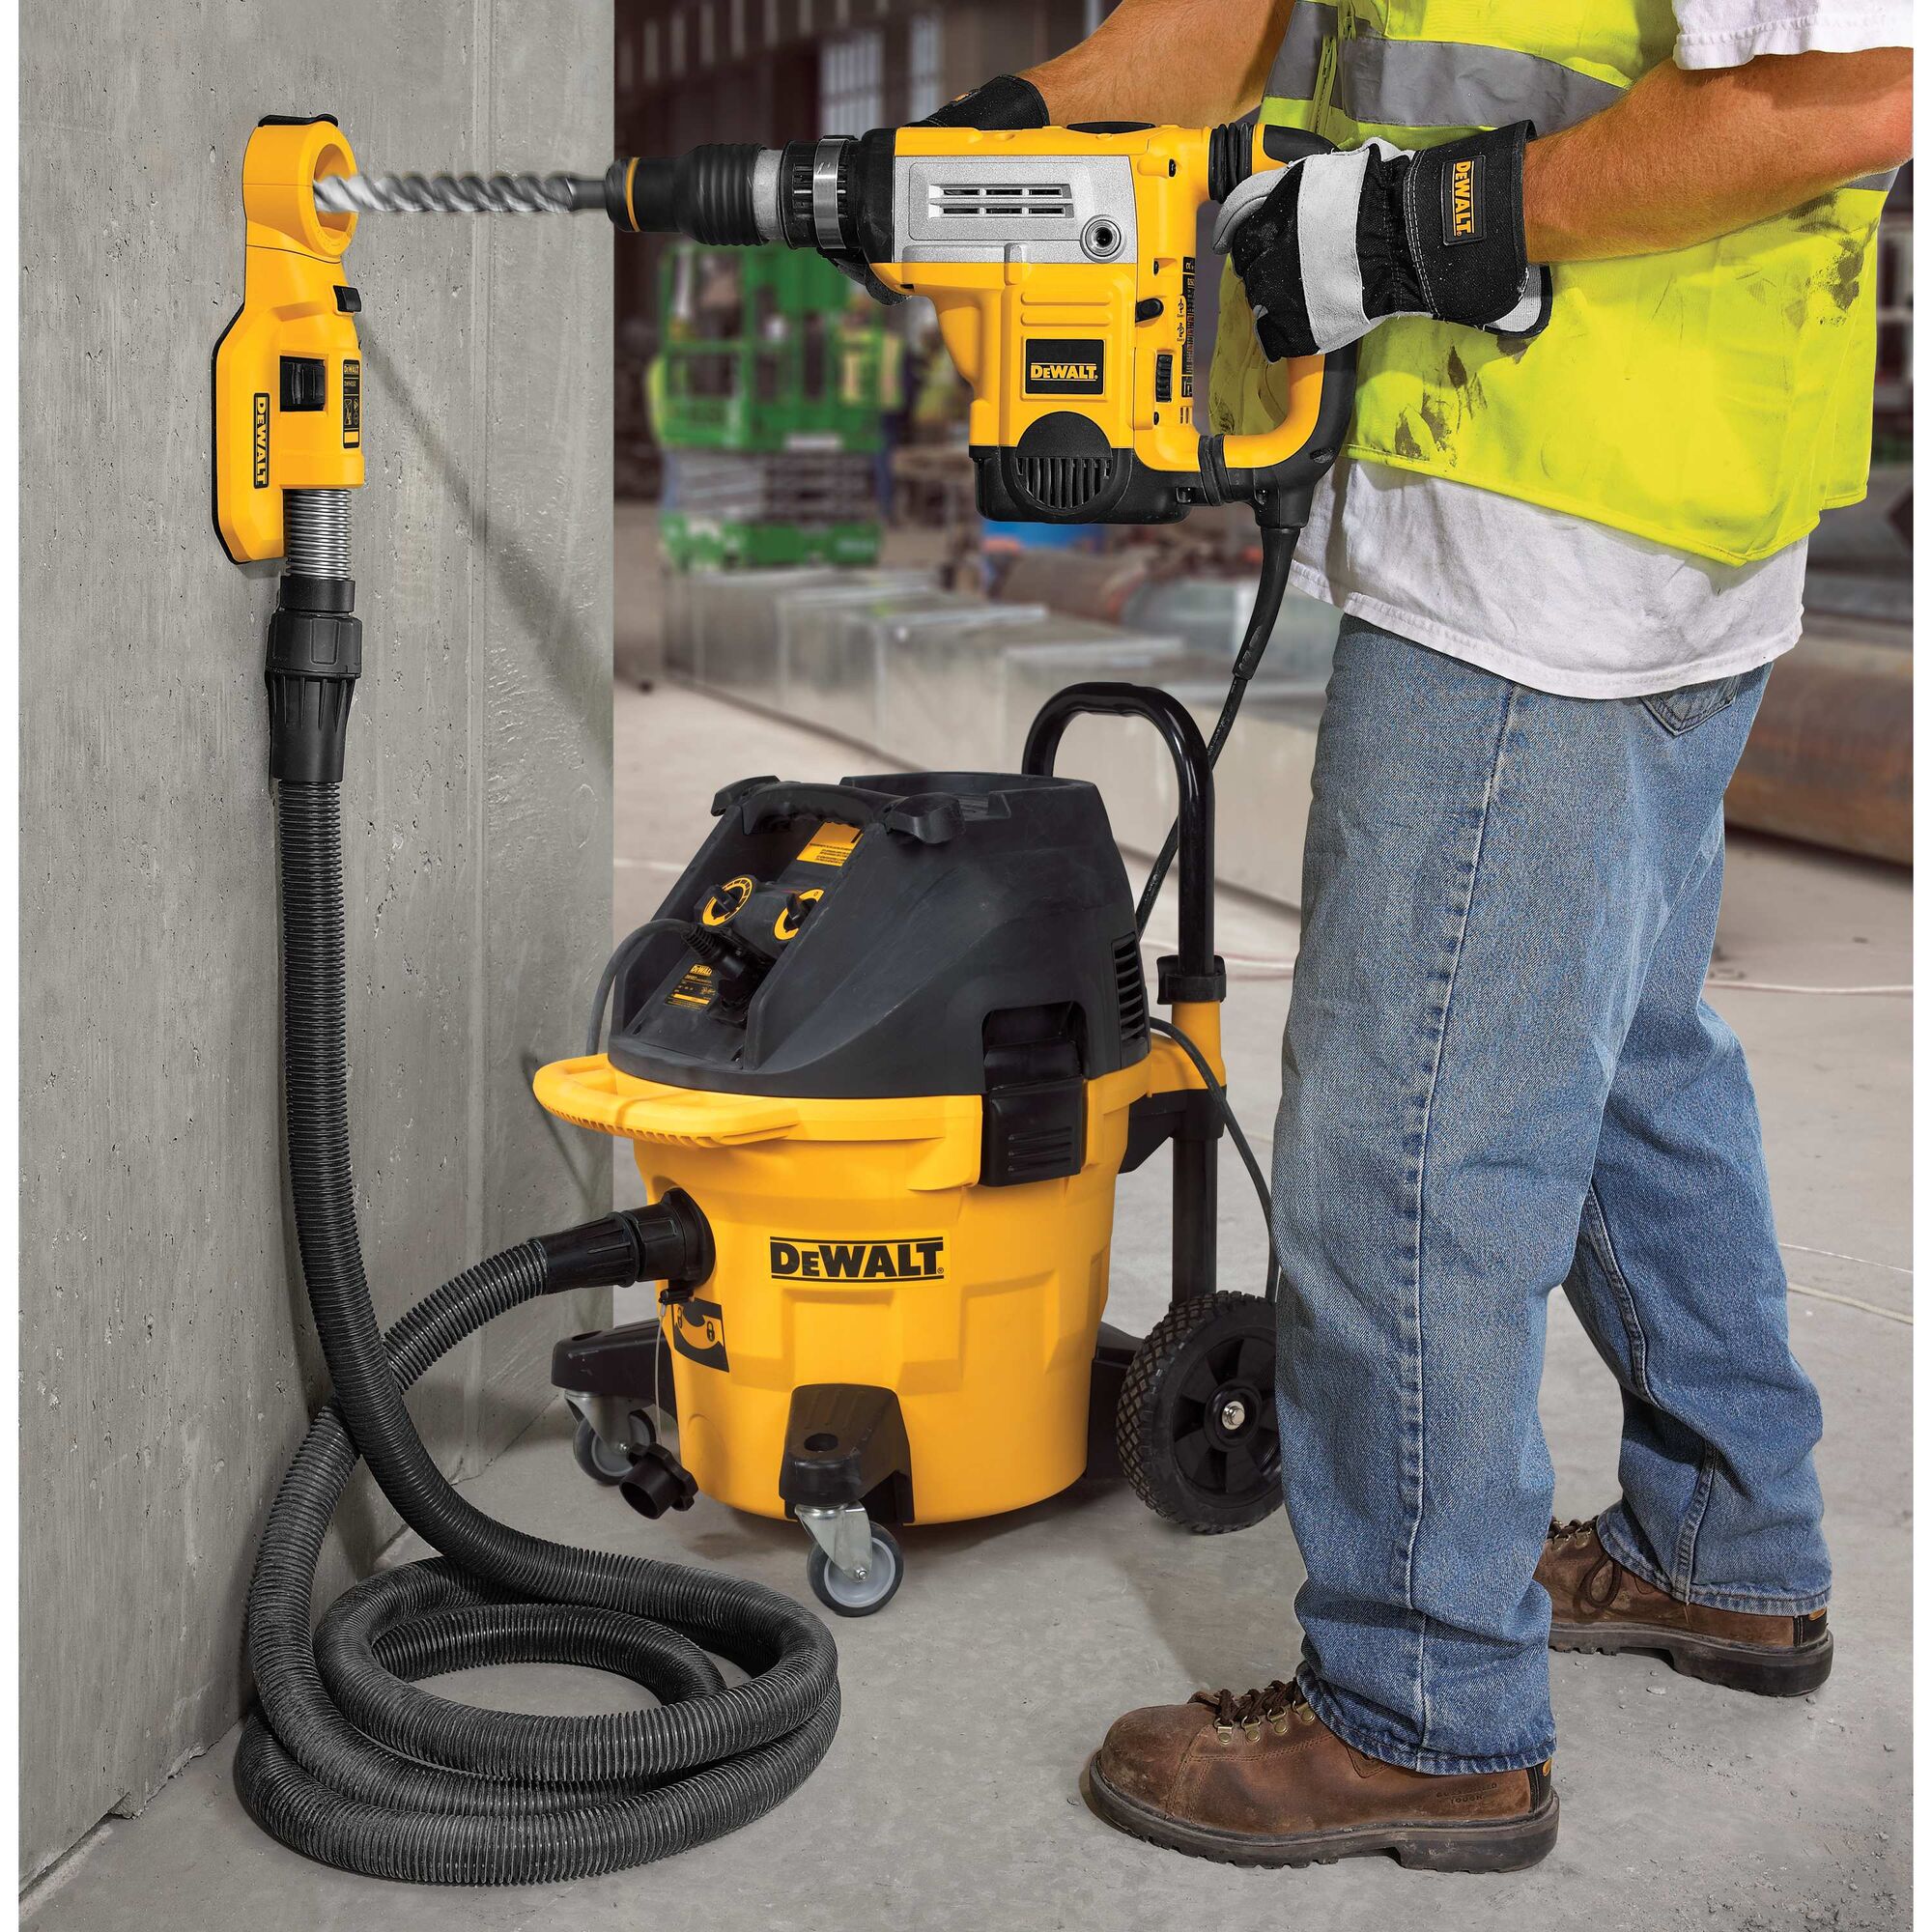 DEWALT DWH050K Large Hammer Drilling Dust Extraction System ， Yellow-